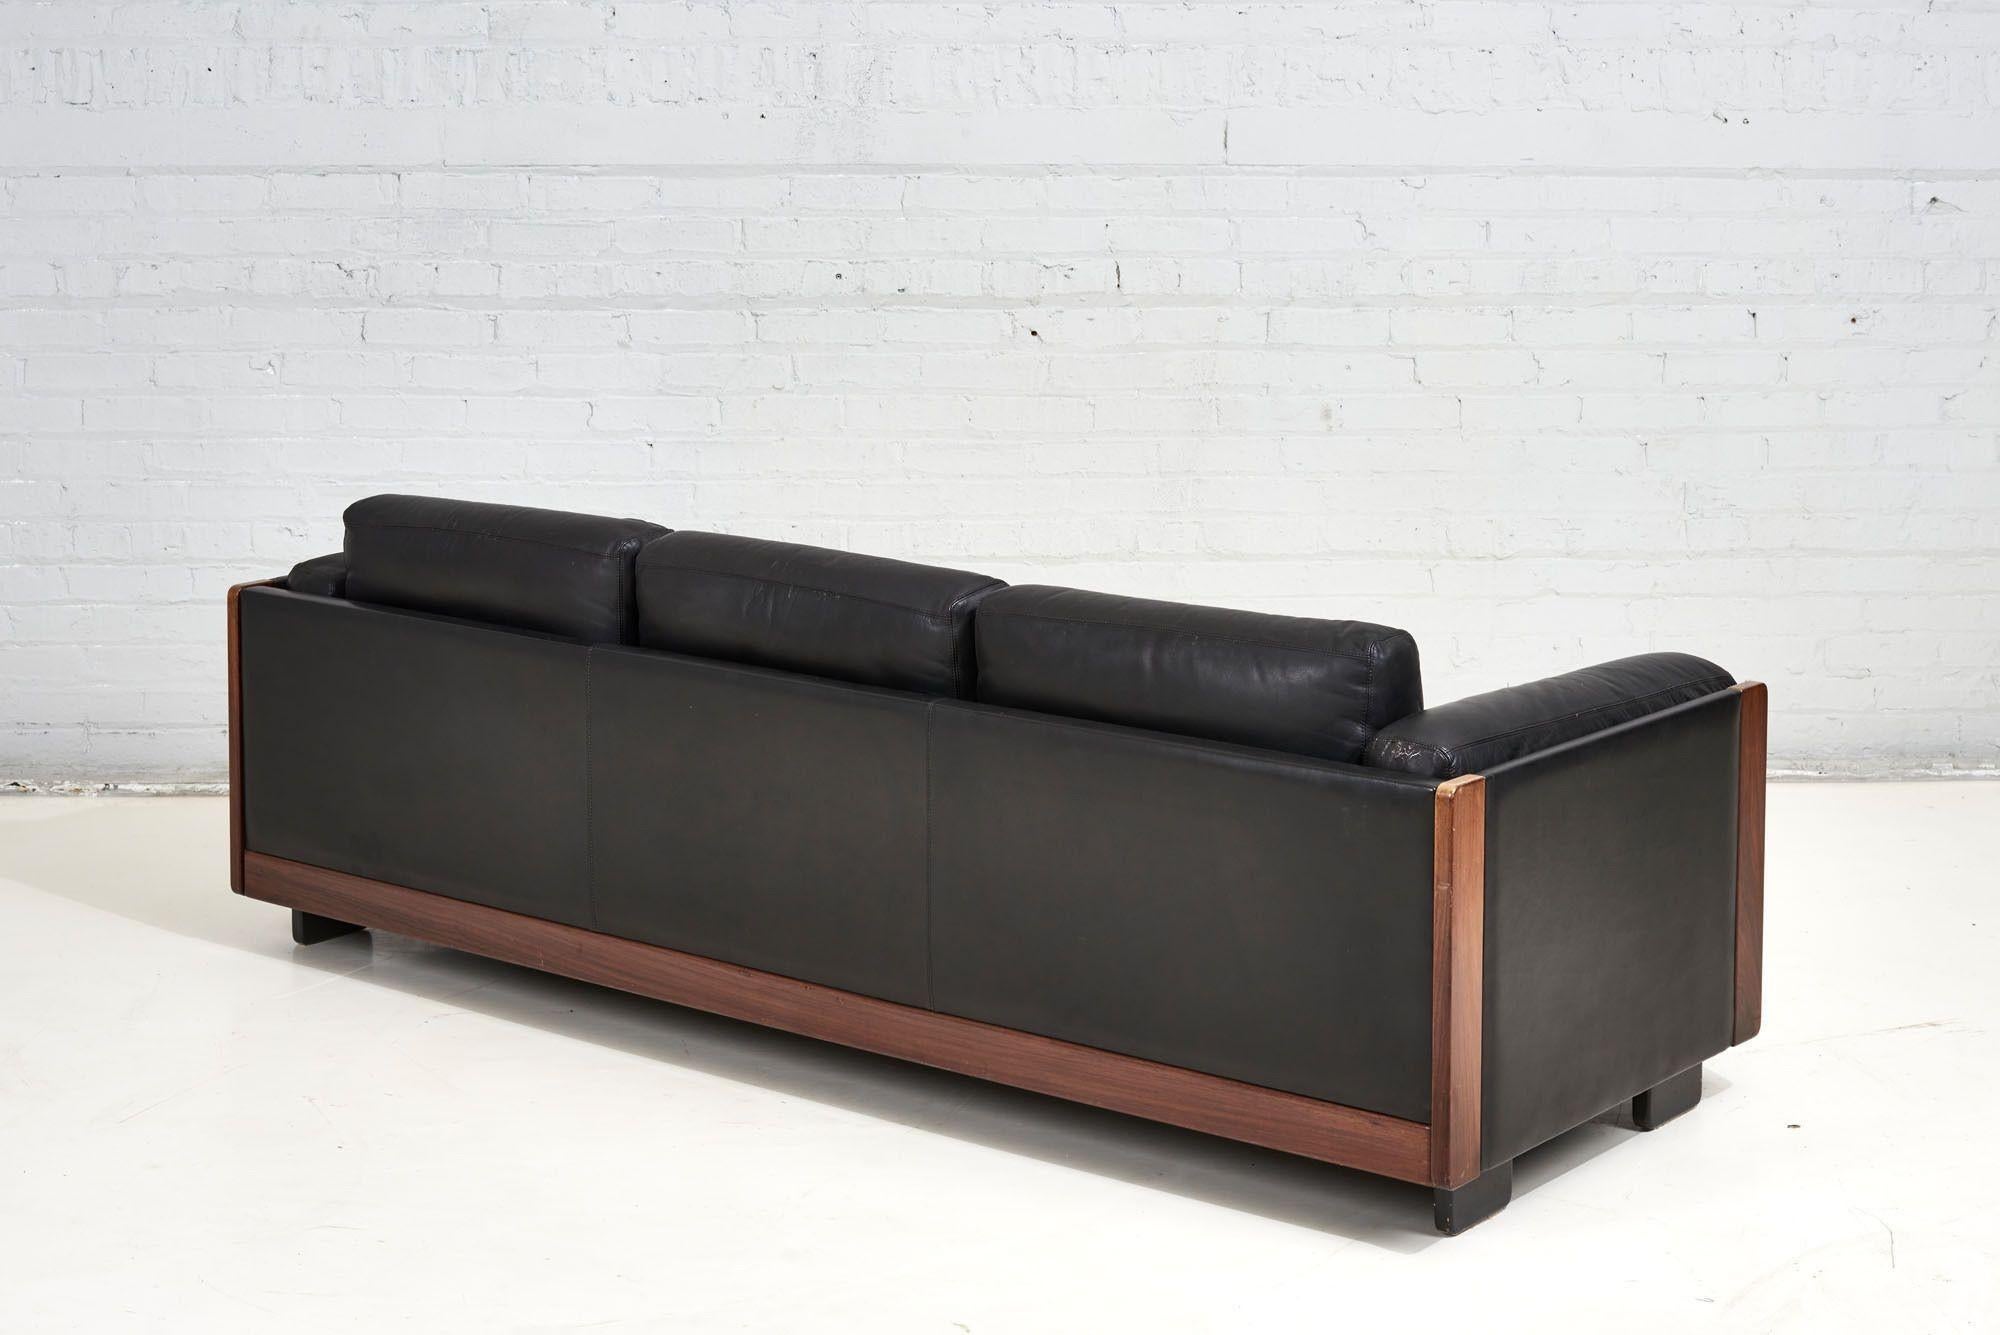 Mid-20th Century Black Leathe/Rosewood “920 Sofa”, Afra & Tobia Scarpa for Cassina, Italy 1960 For Sale